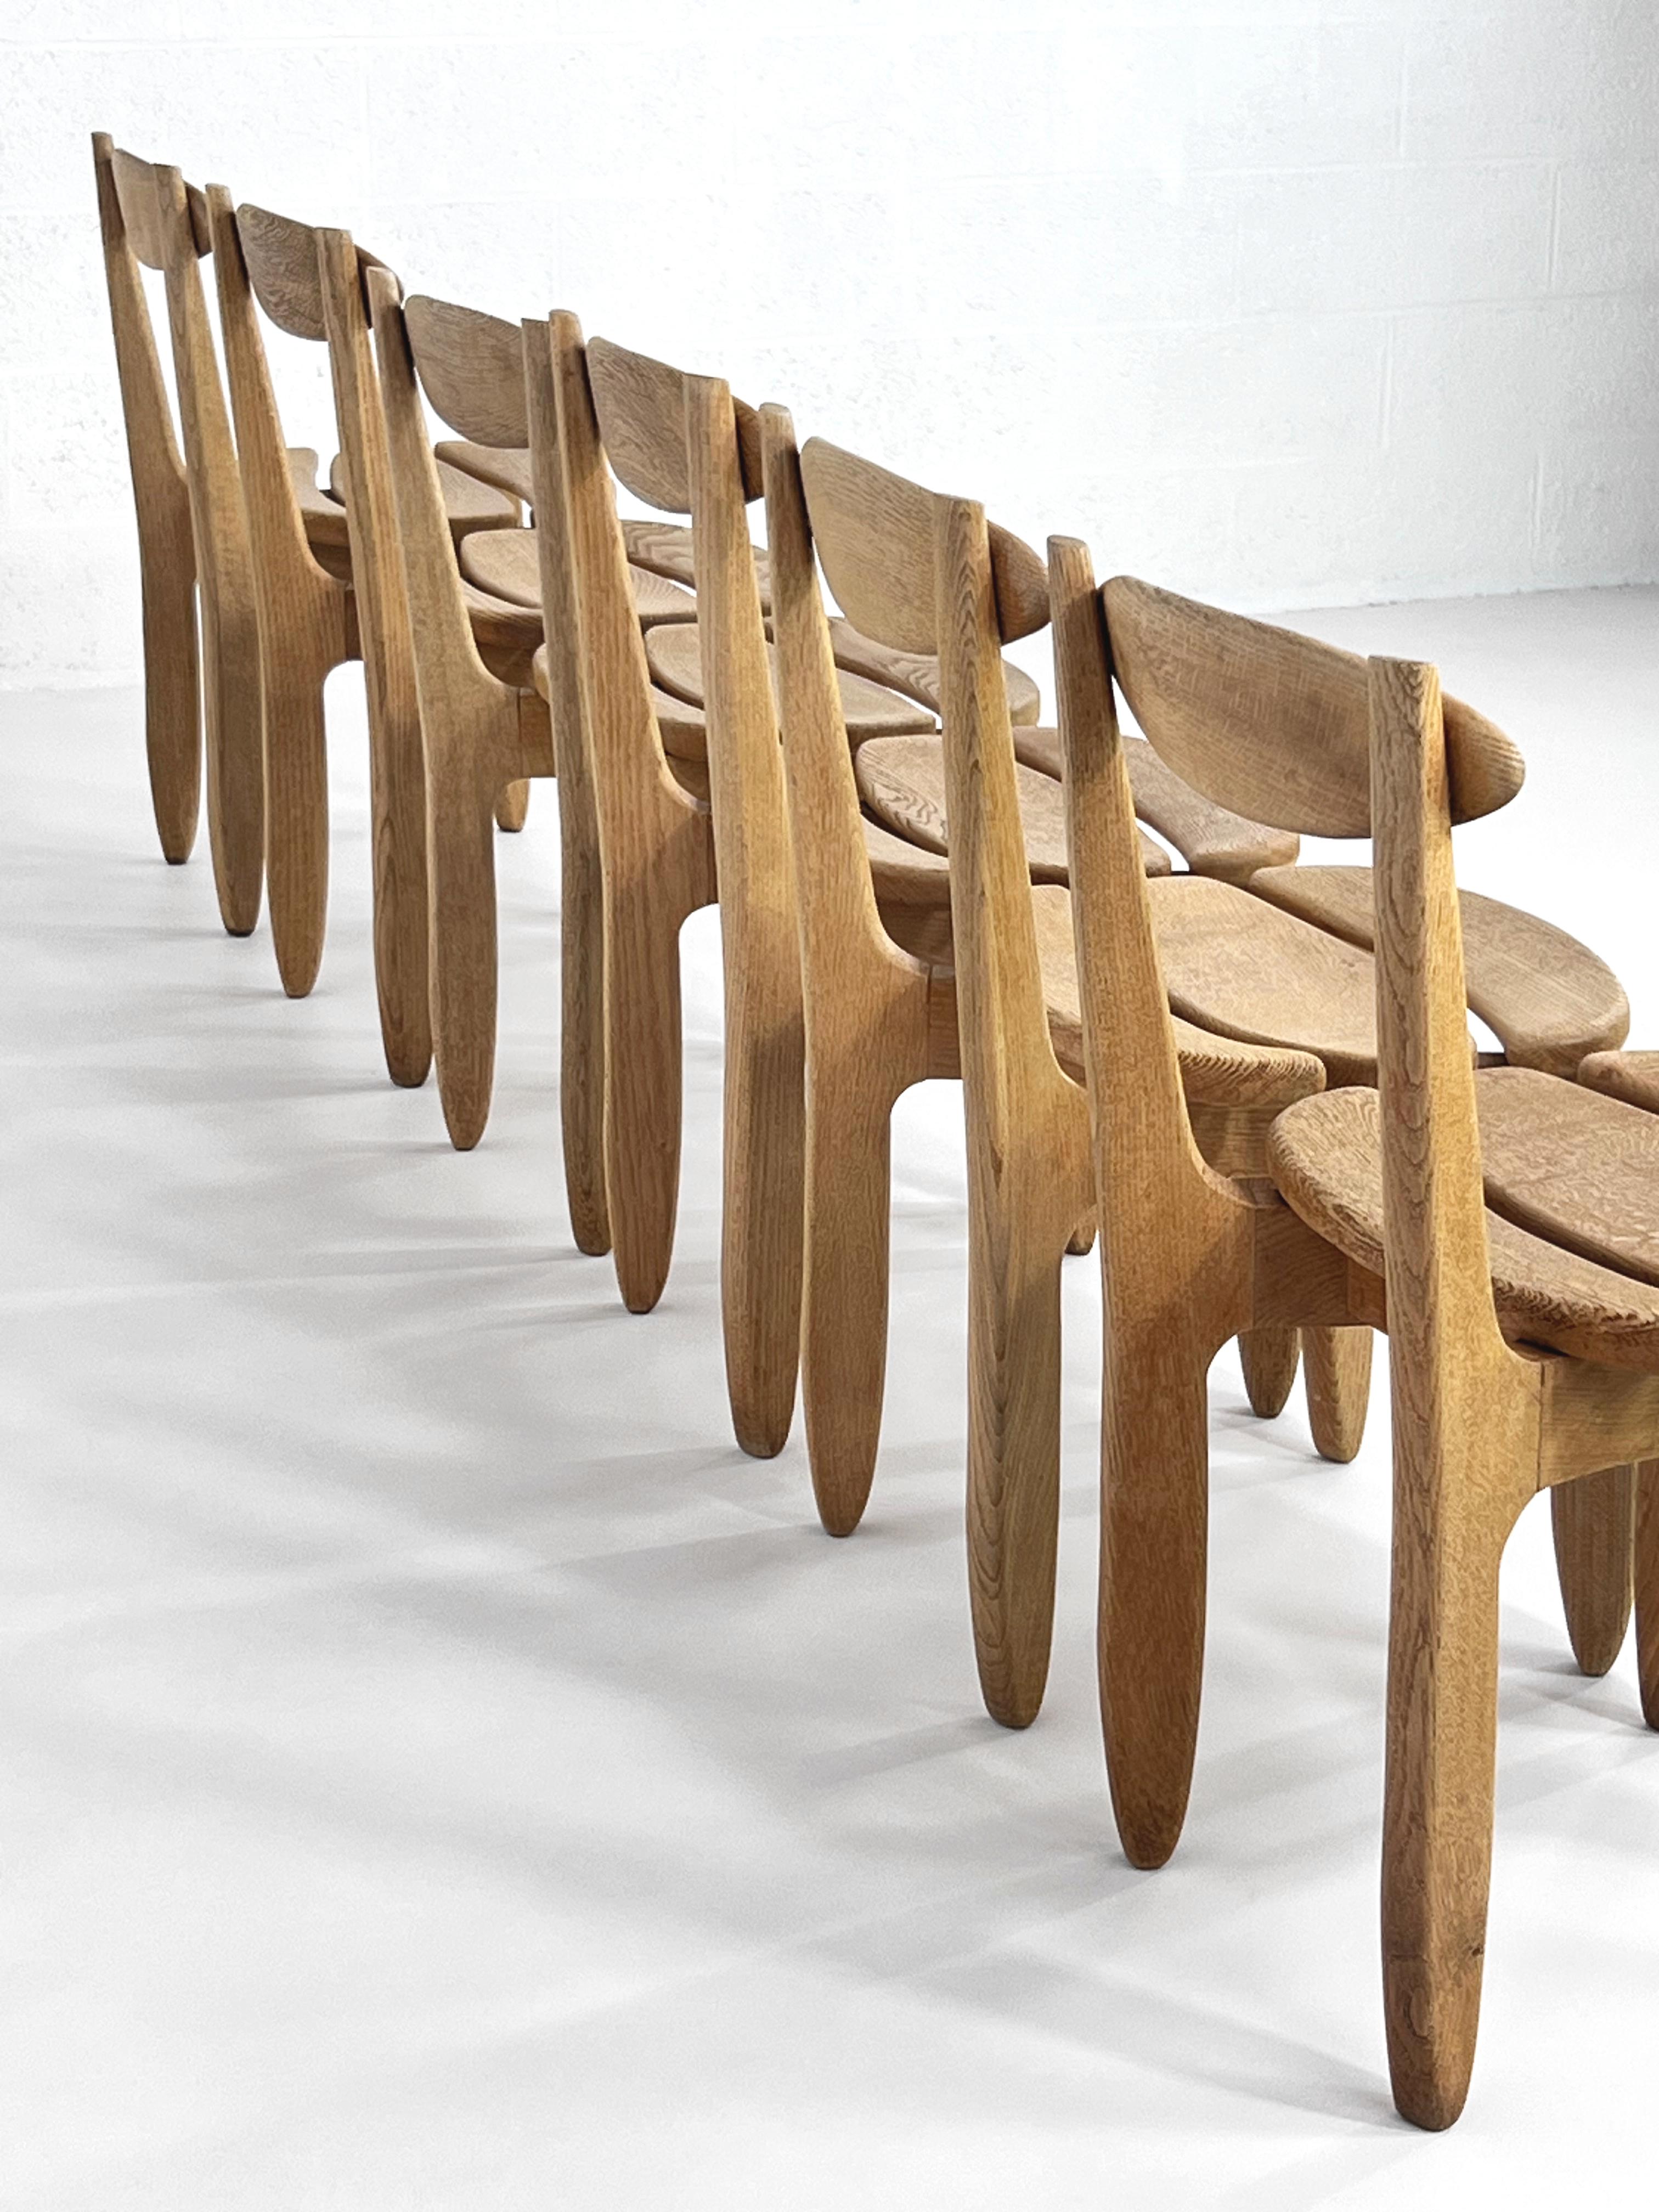 1960s French Guillerme And Chambron Duo Design Oak Wooden Set of 6 Dining Chairs 'Thierry' Model.